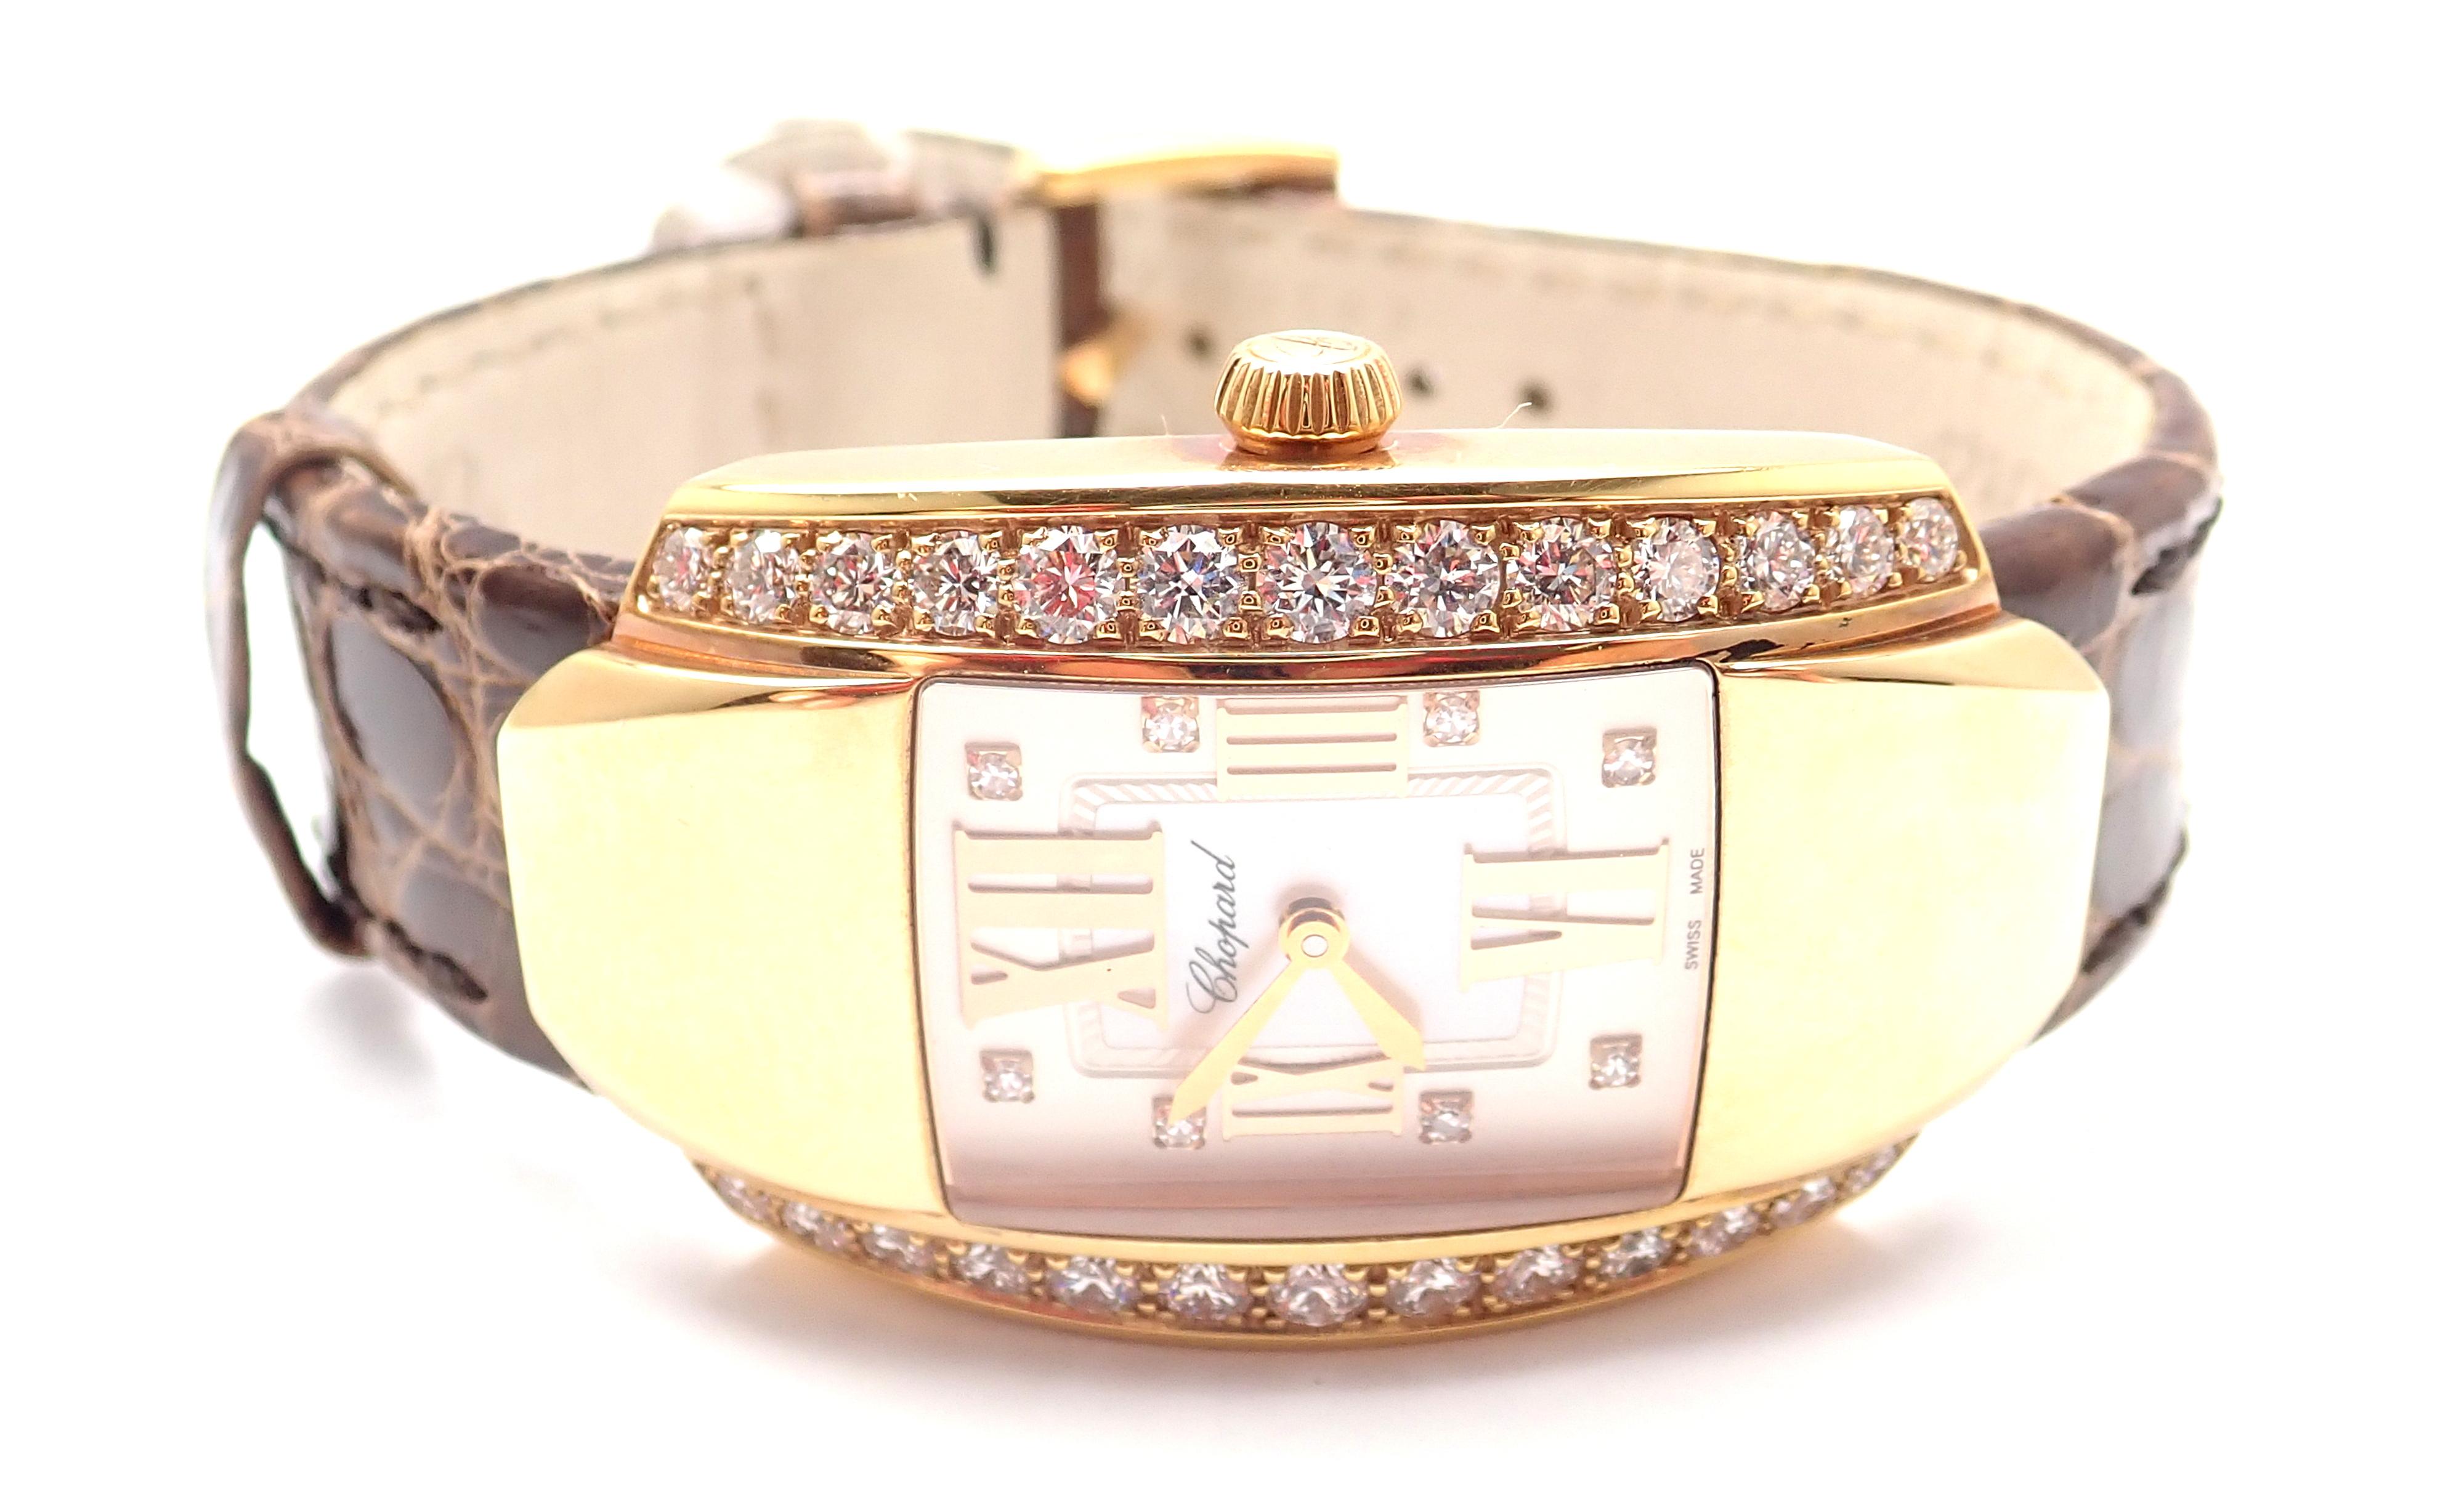 18k yellow gold diamond La Strada watch by Chopard.
With 26 Chopard original round diamonds VVS1 clarity, E color total weight approximately 1.90ct
This watch comes with Chopard box and Chopard certificate of authenticity.
**** This timepiece is a